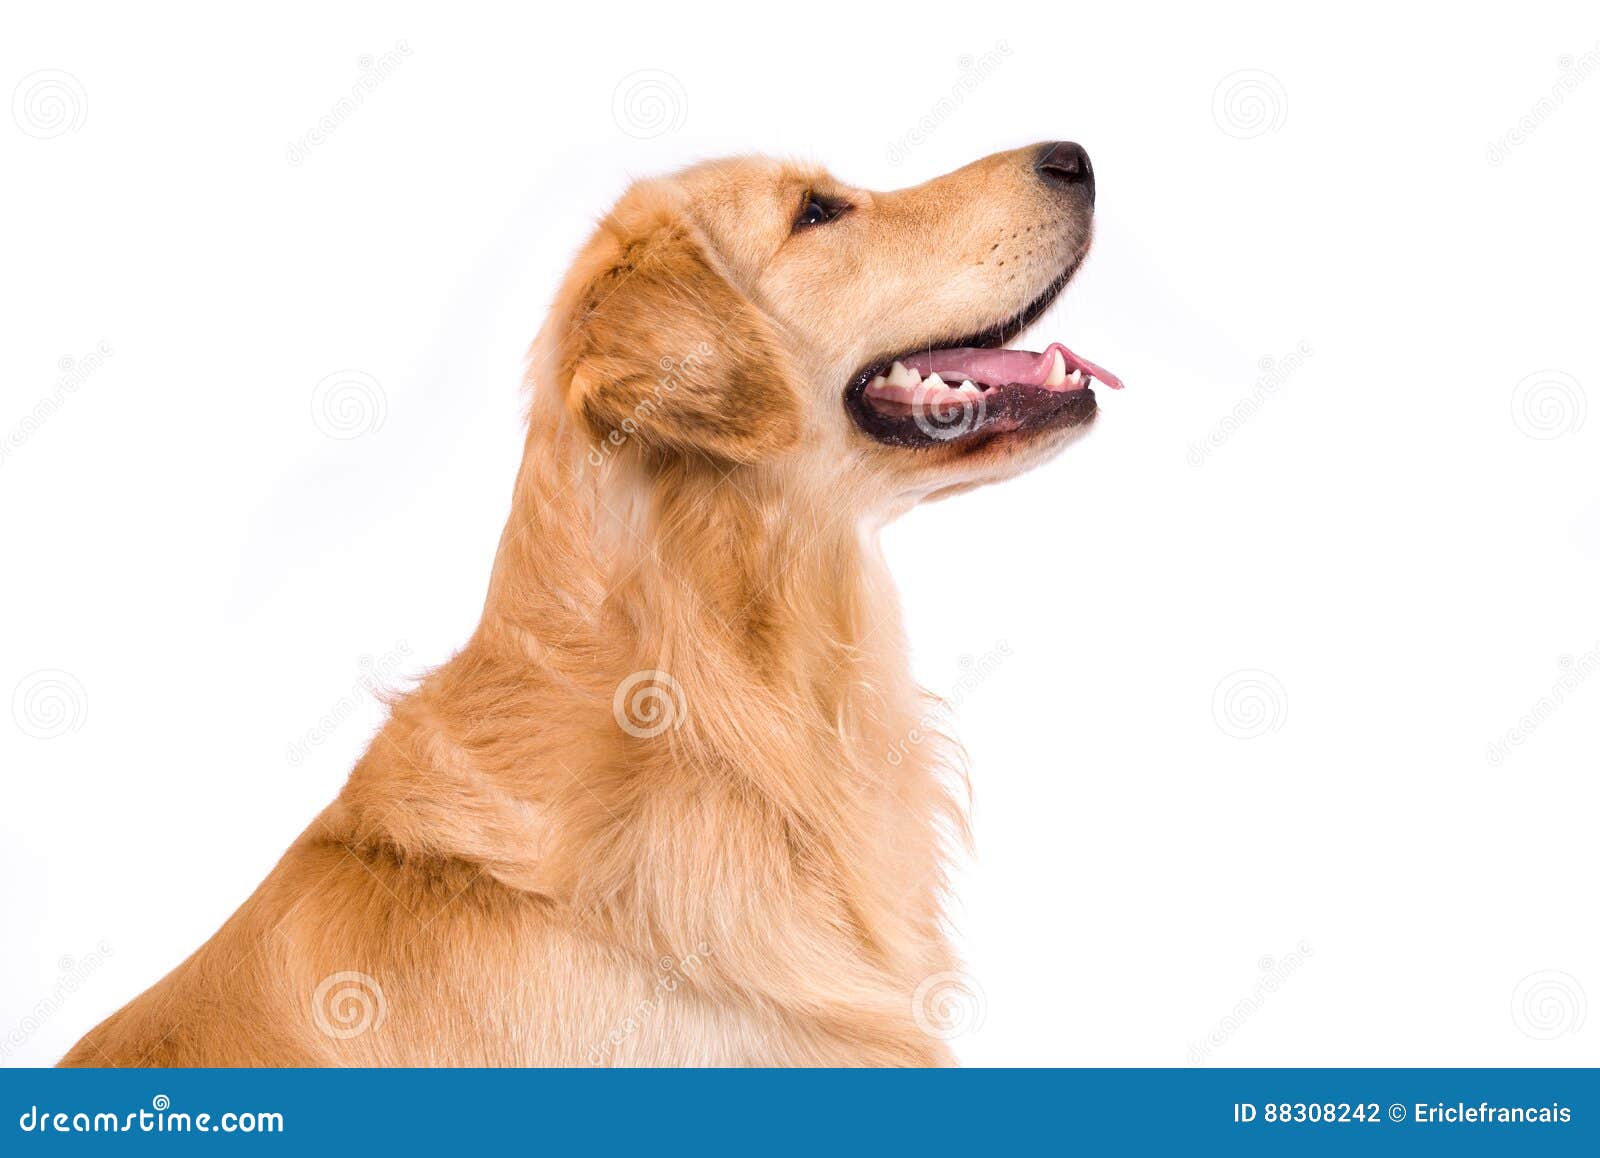 Golden Retriever Adult Sideview Portrait Isolated On White Stock Photo Image Of Animals Copy 88308242